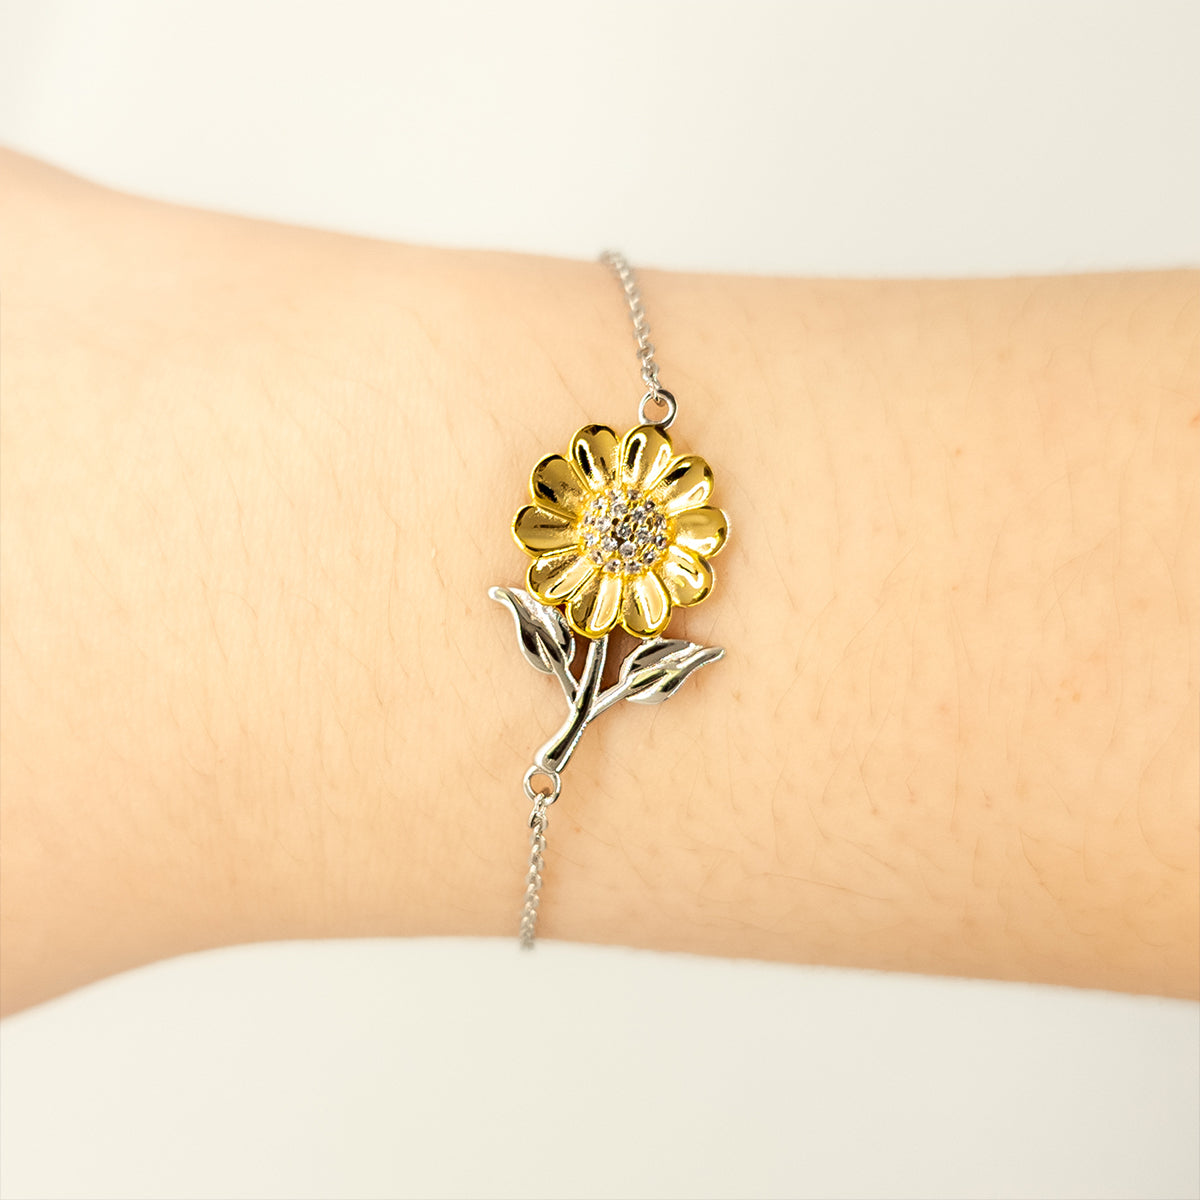 Niece Sunflower Bracelet, Never forget that I love you forever, Inspirational Niece Birthday Unique Gifts From Aunt